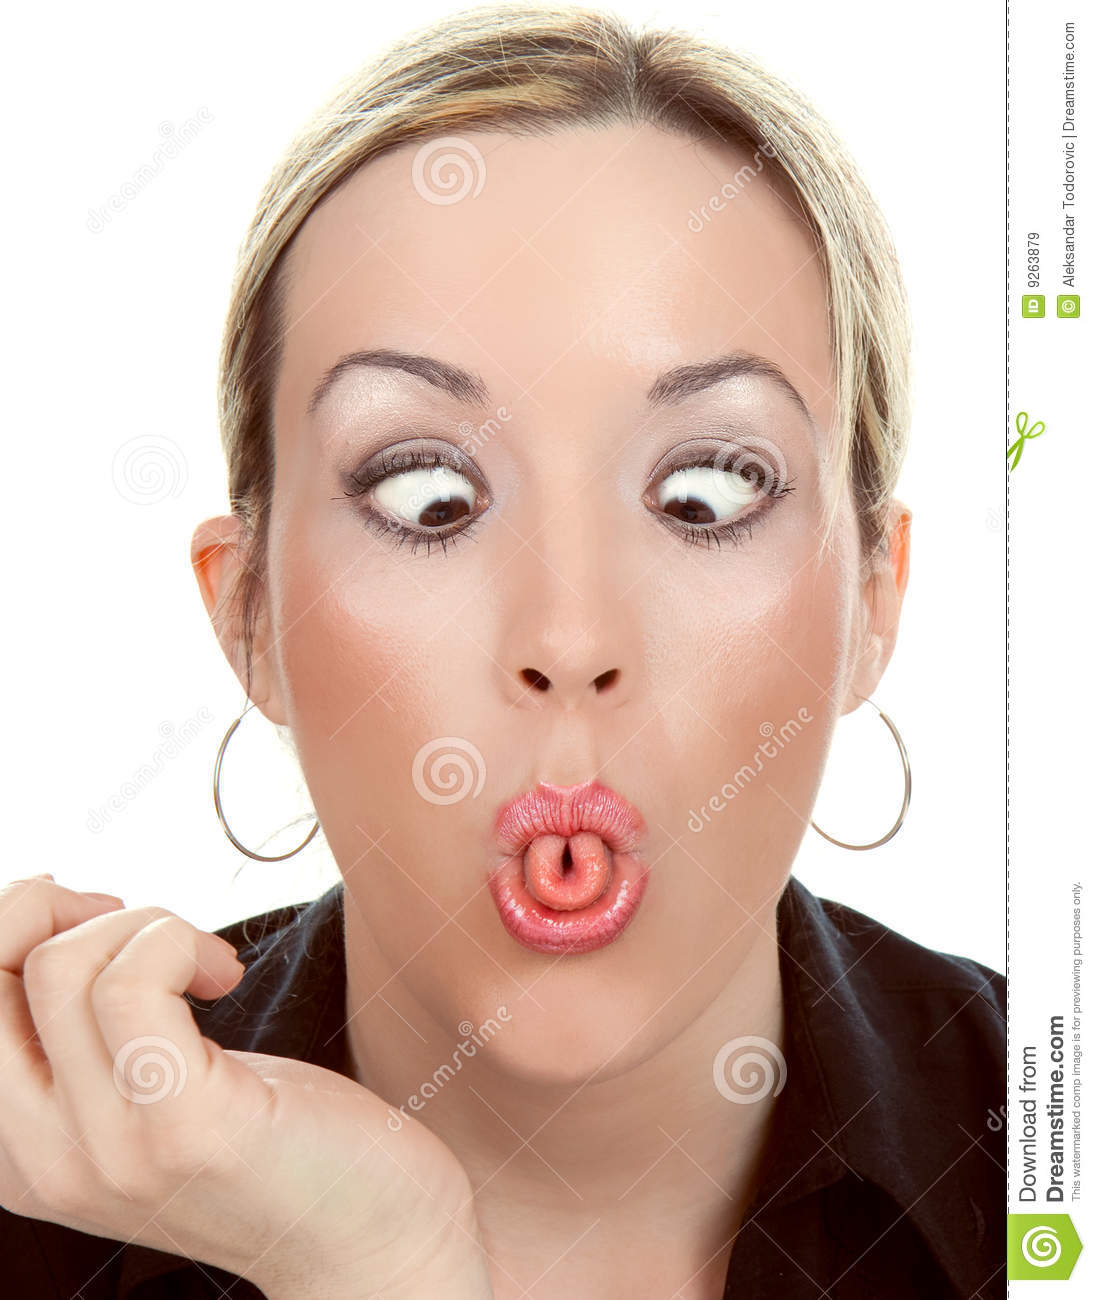 Girl Making Funny Face Picture